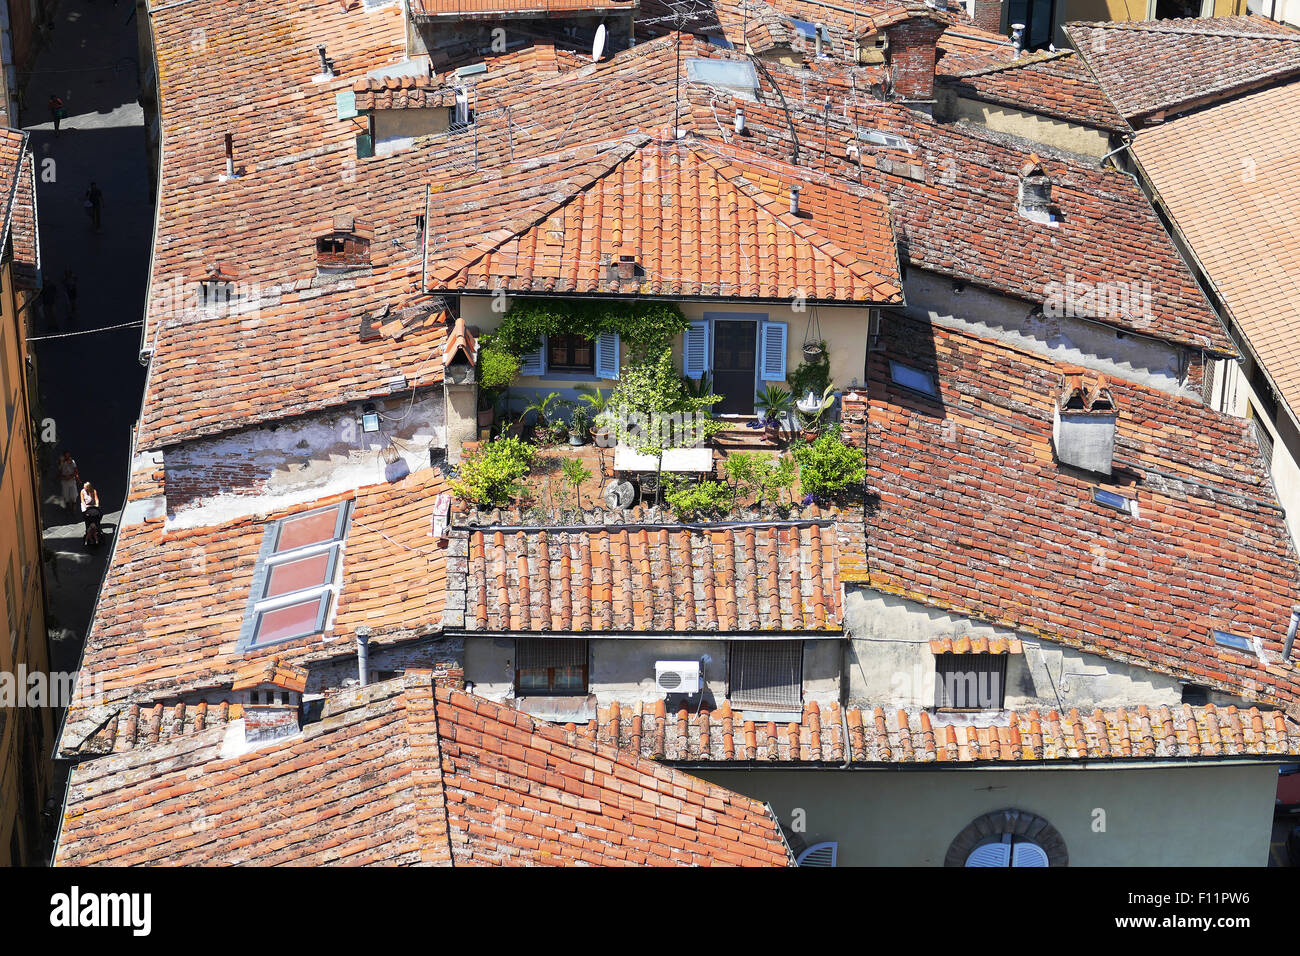 Roofgarden in the city of Lucca, Italy Stock Photo